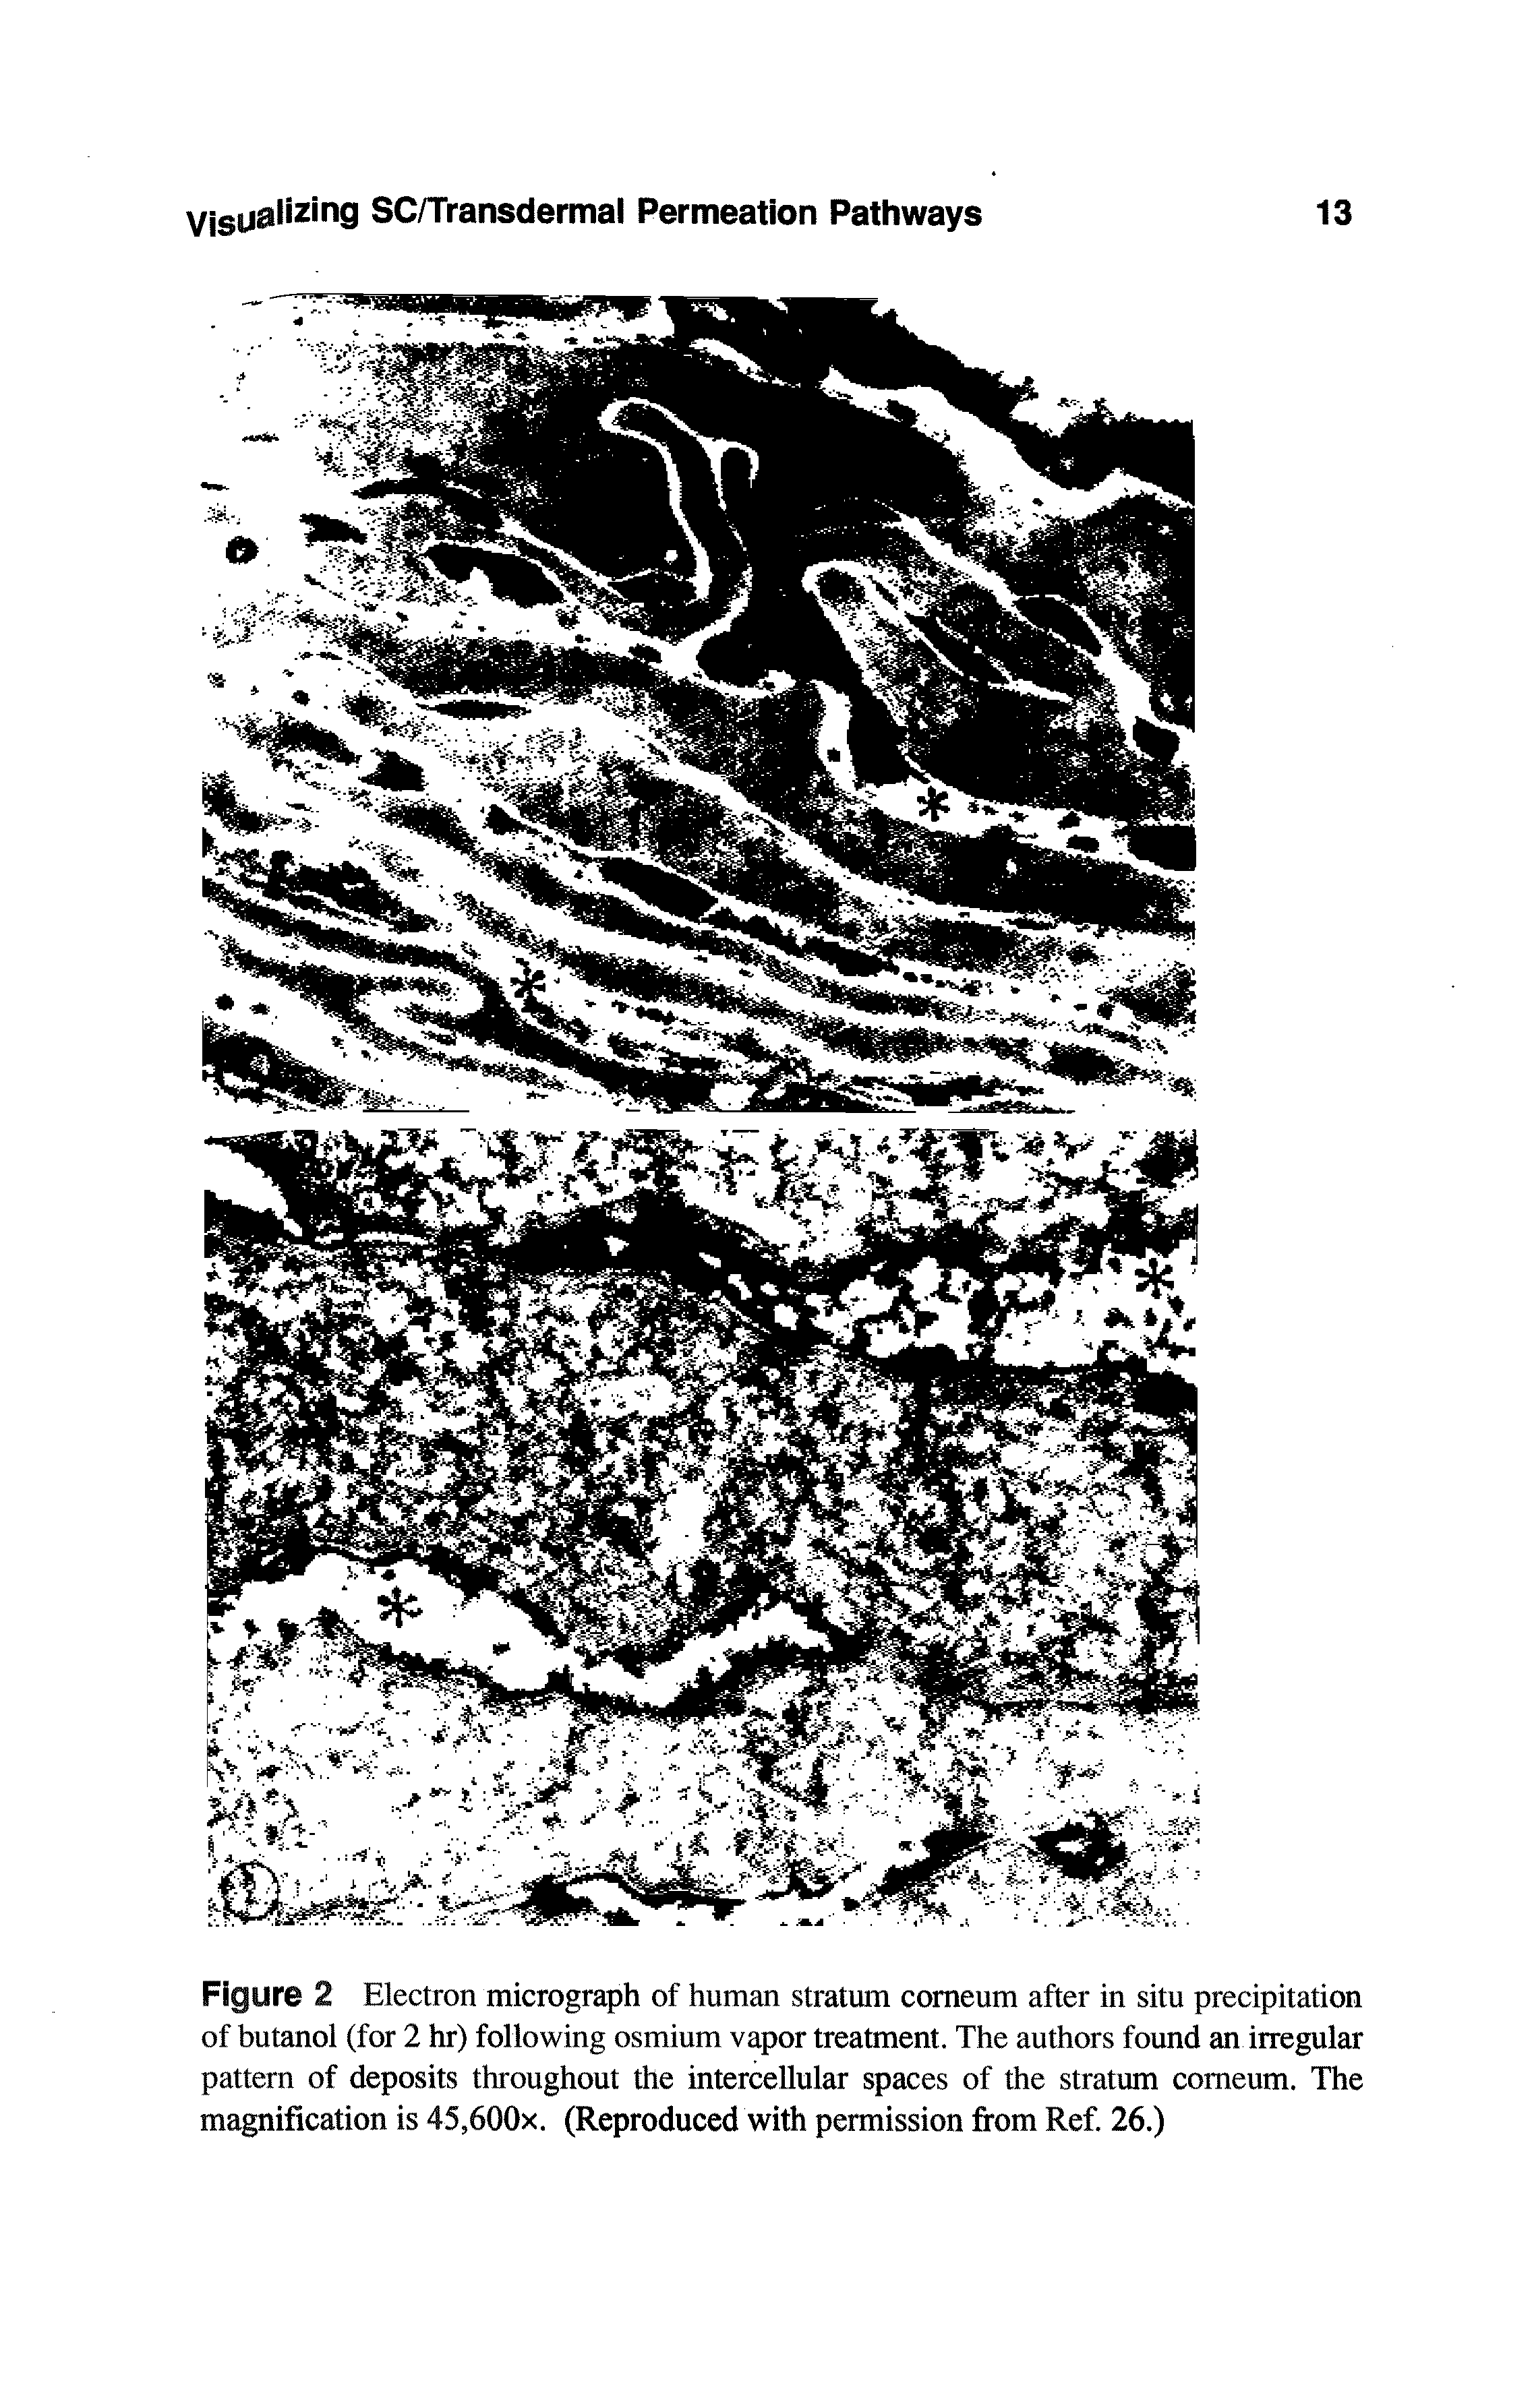 Figure 2 Electron micrograph of human stratum comeum after in situ precipitation of butanol (for 2 hr) following osmium vapor treatment. The authors found an irregular pattern of deposits throughout the intercellular spaces of the stratum comeum. The magnification is 45,600x. (Reproduced with permission from Ref. 26.)...